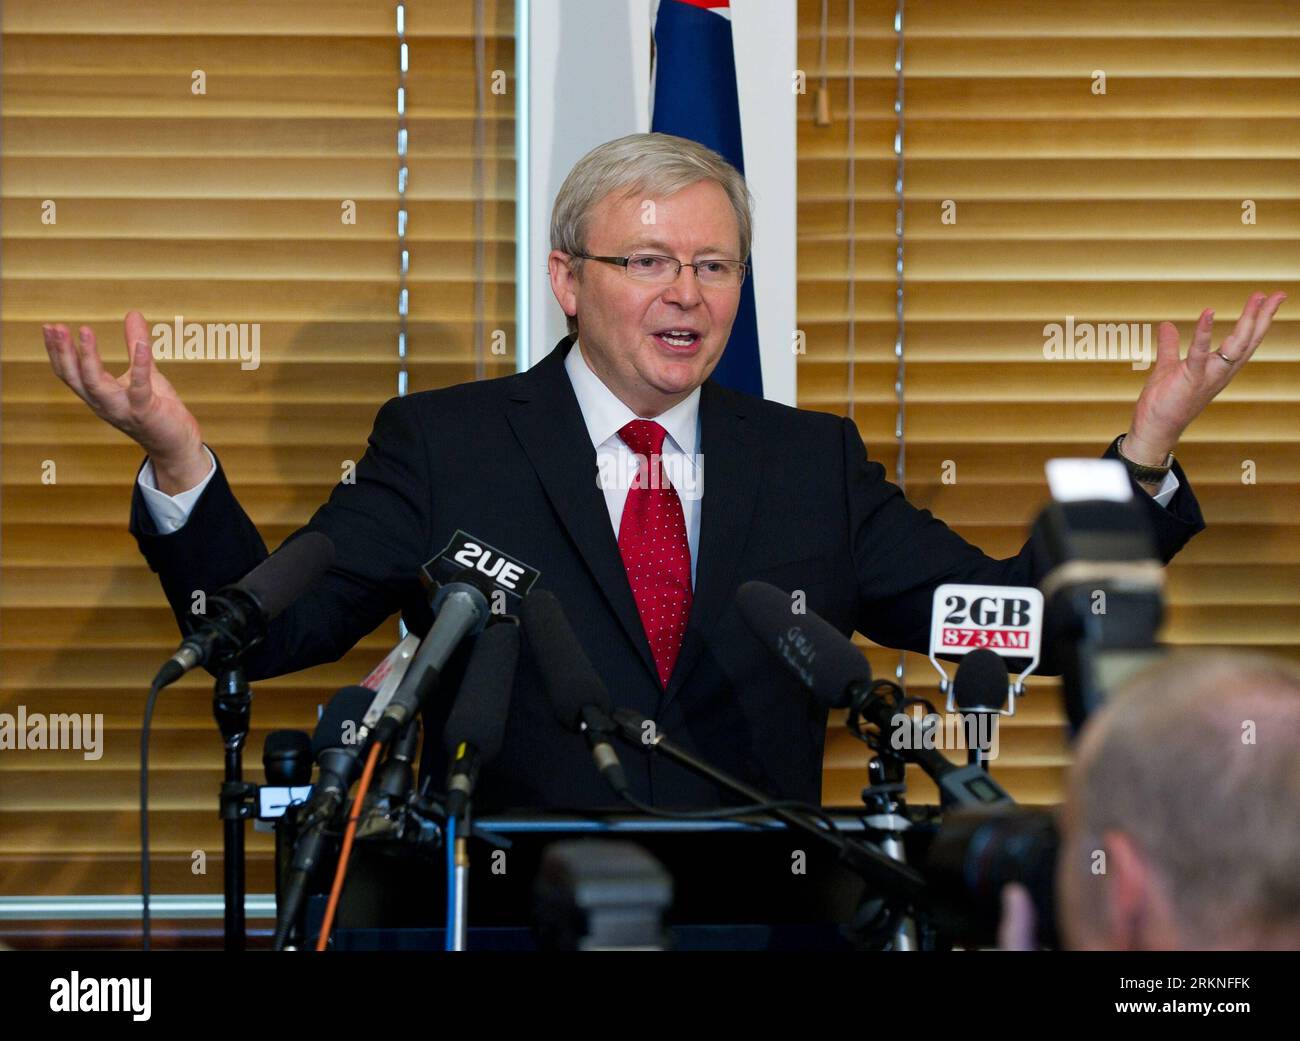 Bildnummer: 57111414  Datum: 26.02.2012  Copyright: imago/Xinhua (120227) -- CANBERRA, Feb. 27, 2012 (Xinhua) -- Former Prime Minister and Foreign Minister Kevin Rudd speaks at a press conference after Australian Prime Minister Julia Gillard wins the Labor ballot vote in Canberra, Australia, Feb. 27, 2012. Kevin Rudd said here Monday he congratulated current leader of the ruling Labor party Julia Gillard on her strong win and he bore no grudges. (Xinhua/Bai Xue) (zyw) AUSTRALIA-CANBERRA-LABOR CAUCUS PUBLICATIONxNOTxINxCHN PEople Politik premiumd xsp x0x 2012 quer      57111414 Date 26 02 2012 Stock Photo